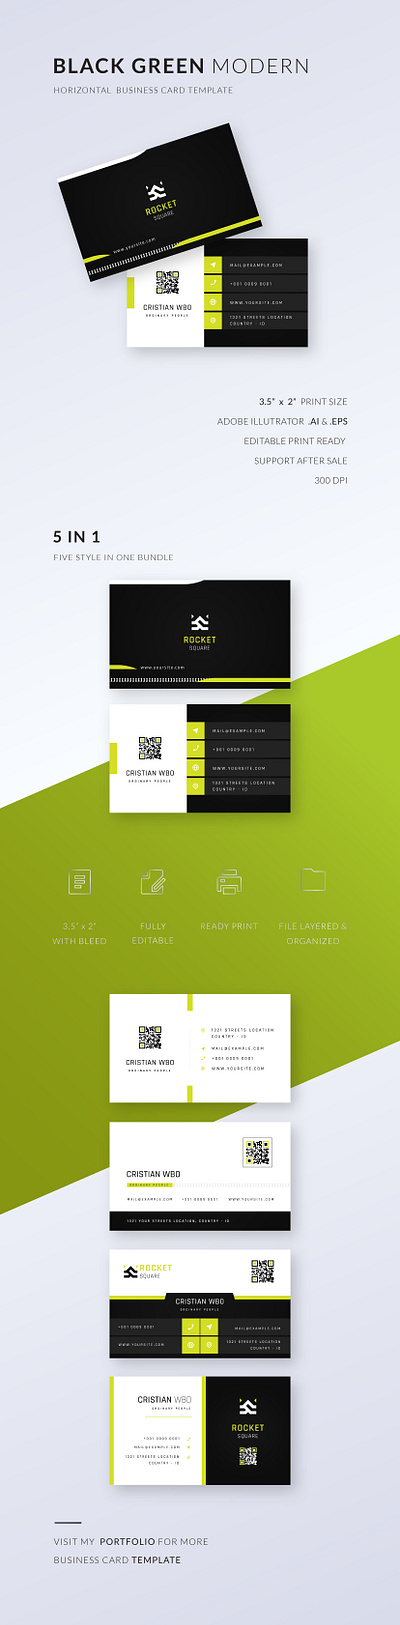 BLACK GREEN MODERN BUSINESS CARD TEMPLATE branding business business card business cards card design editable editable business card graphic design logo modern modern business card professional professional business card qr code qr code business card template vector vector business card visit card